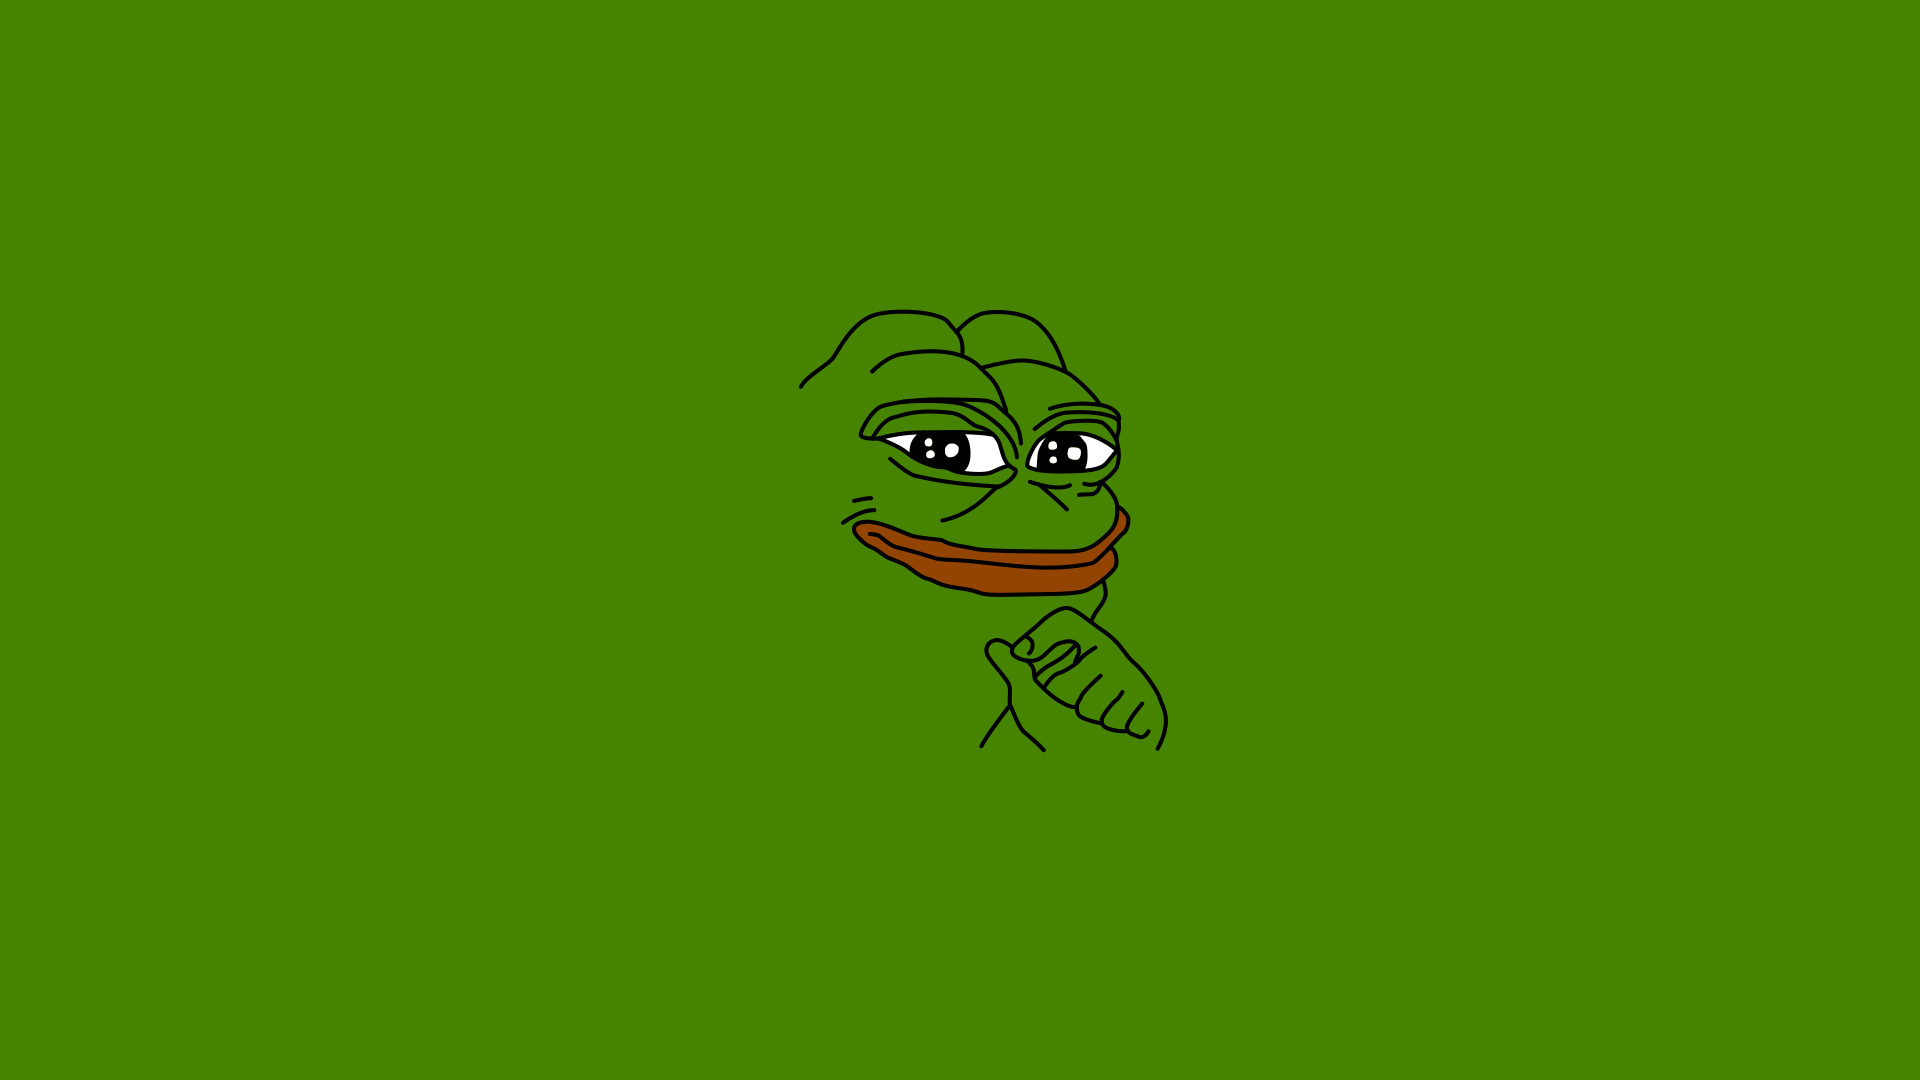  Pepe  the Frog  Wallpapers   WallpaperTag